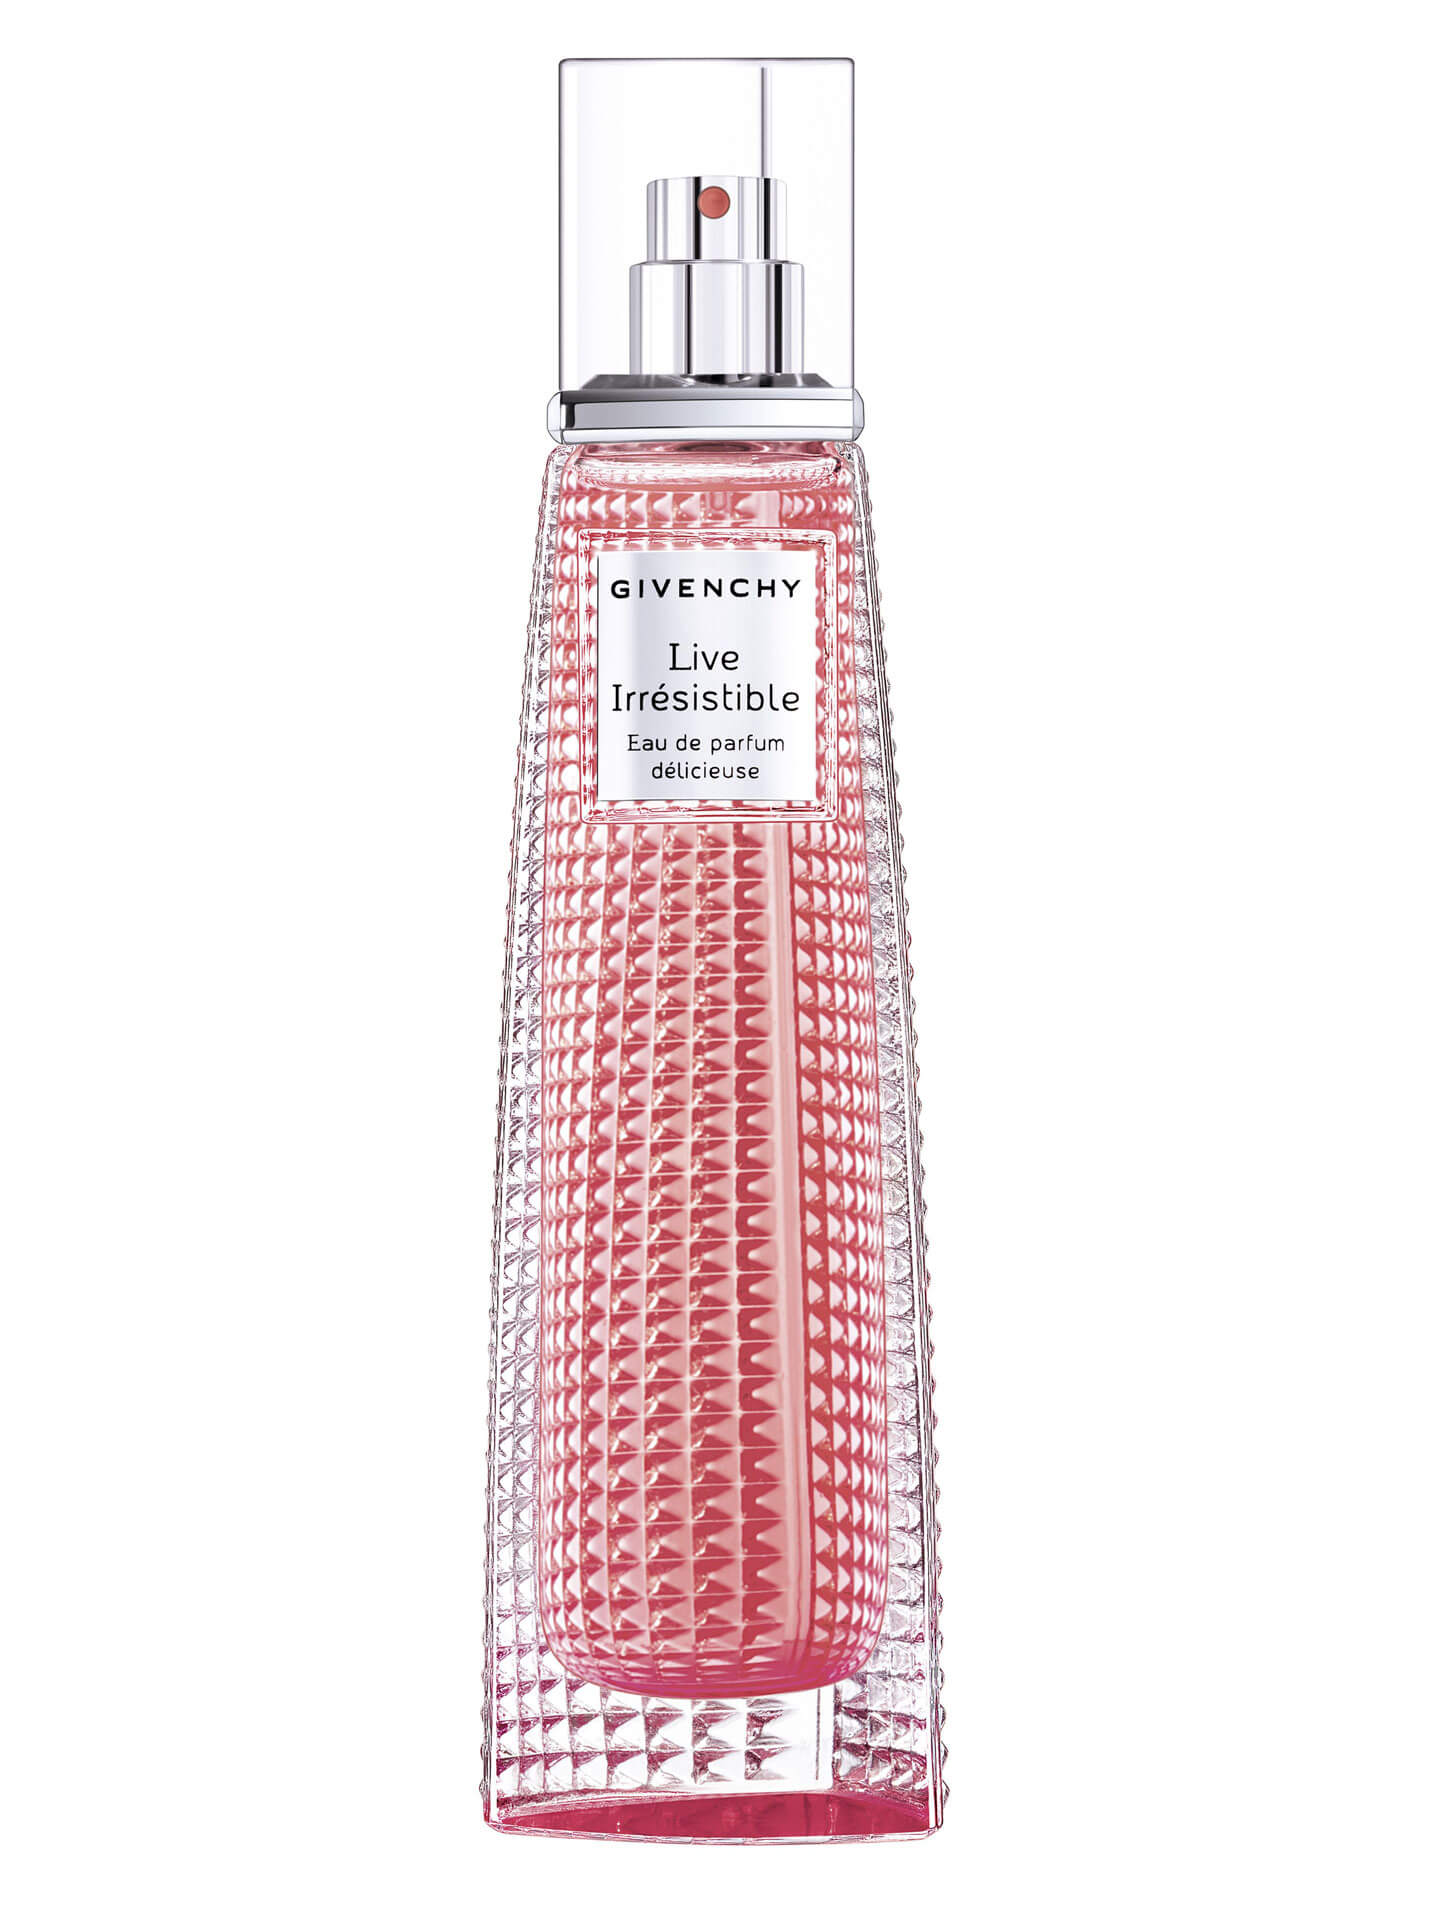 Парфюмерная вода Givenchy Givenchy Live Irresistible Delicieuse 75ml тестер